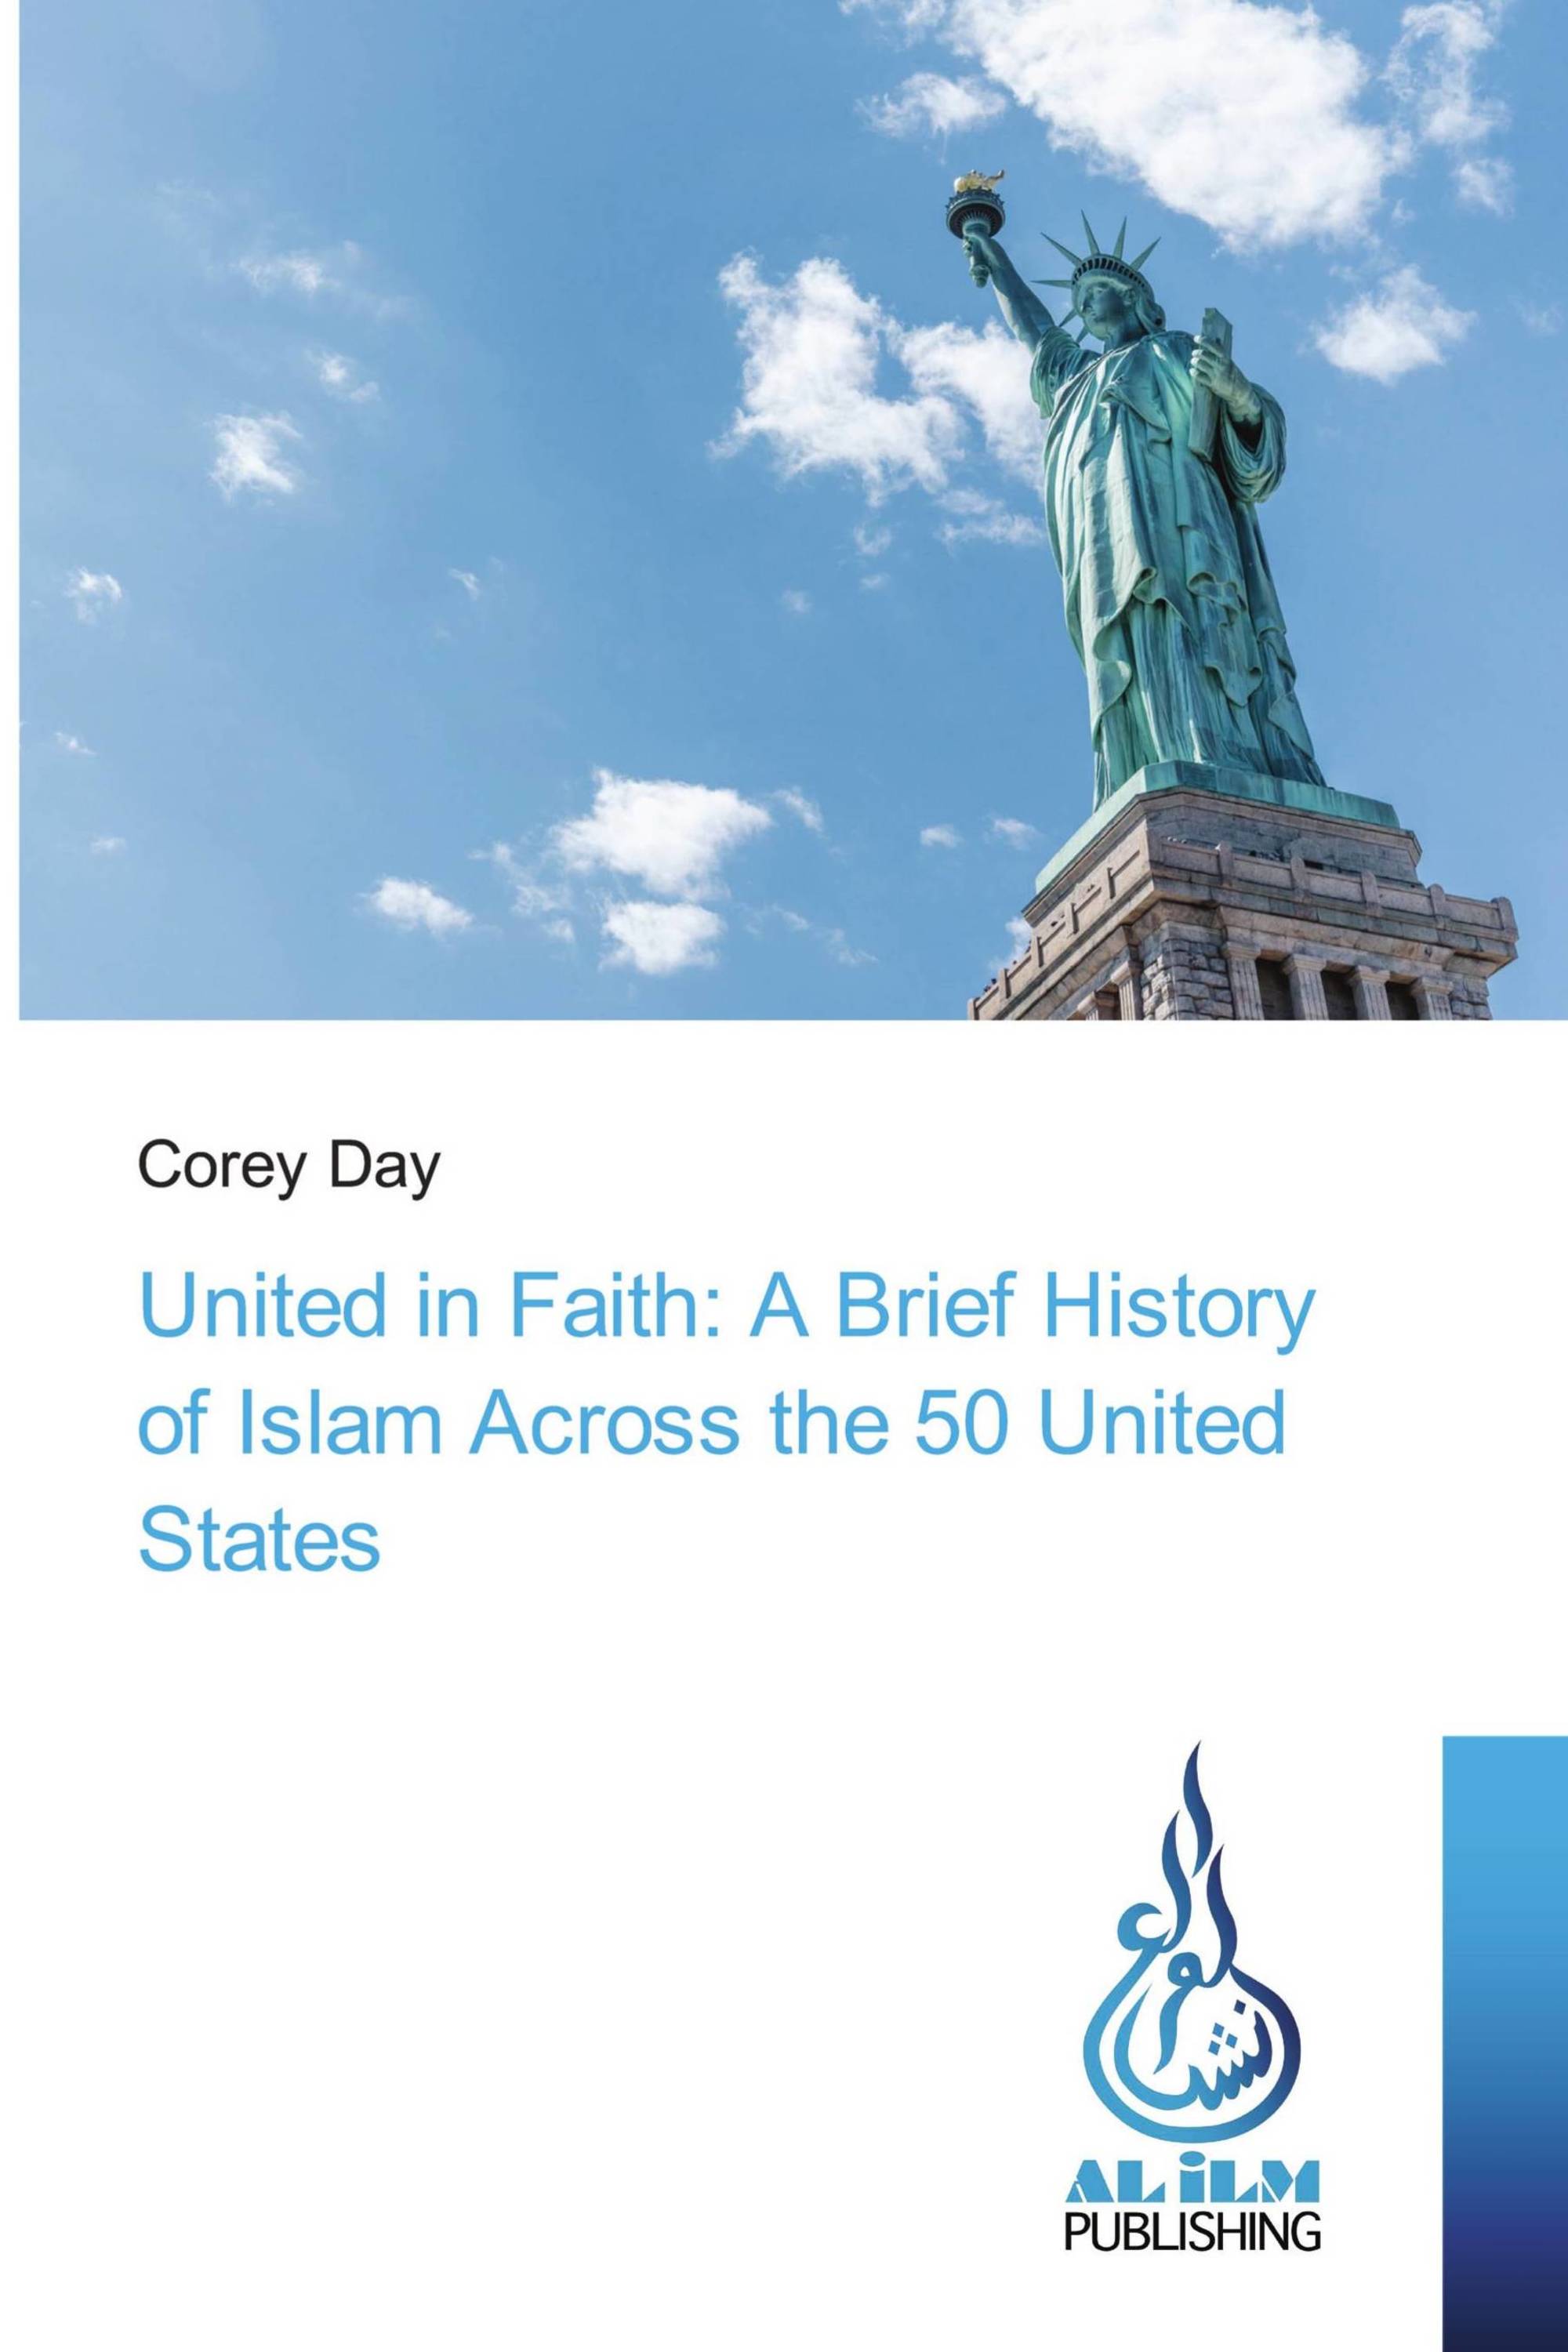 United in Faith: A Brief History of Islam Across the 50 United States